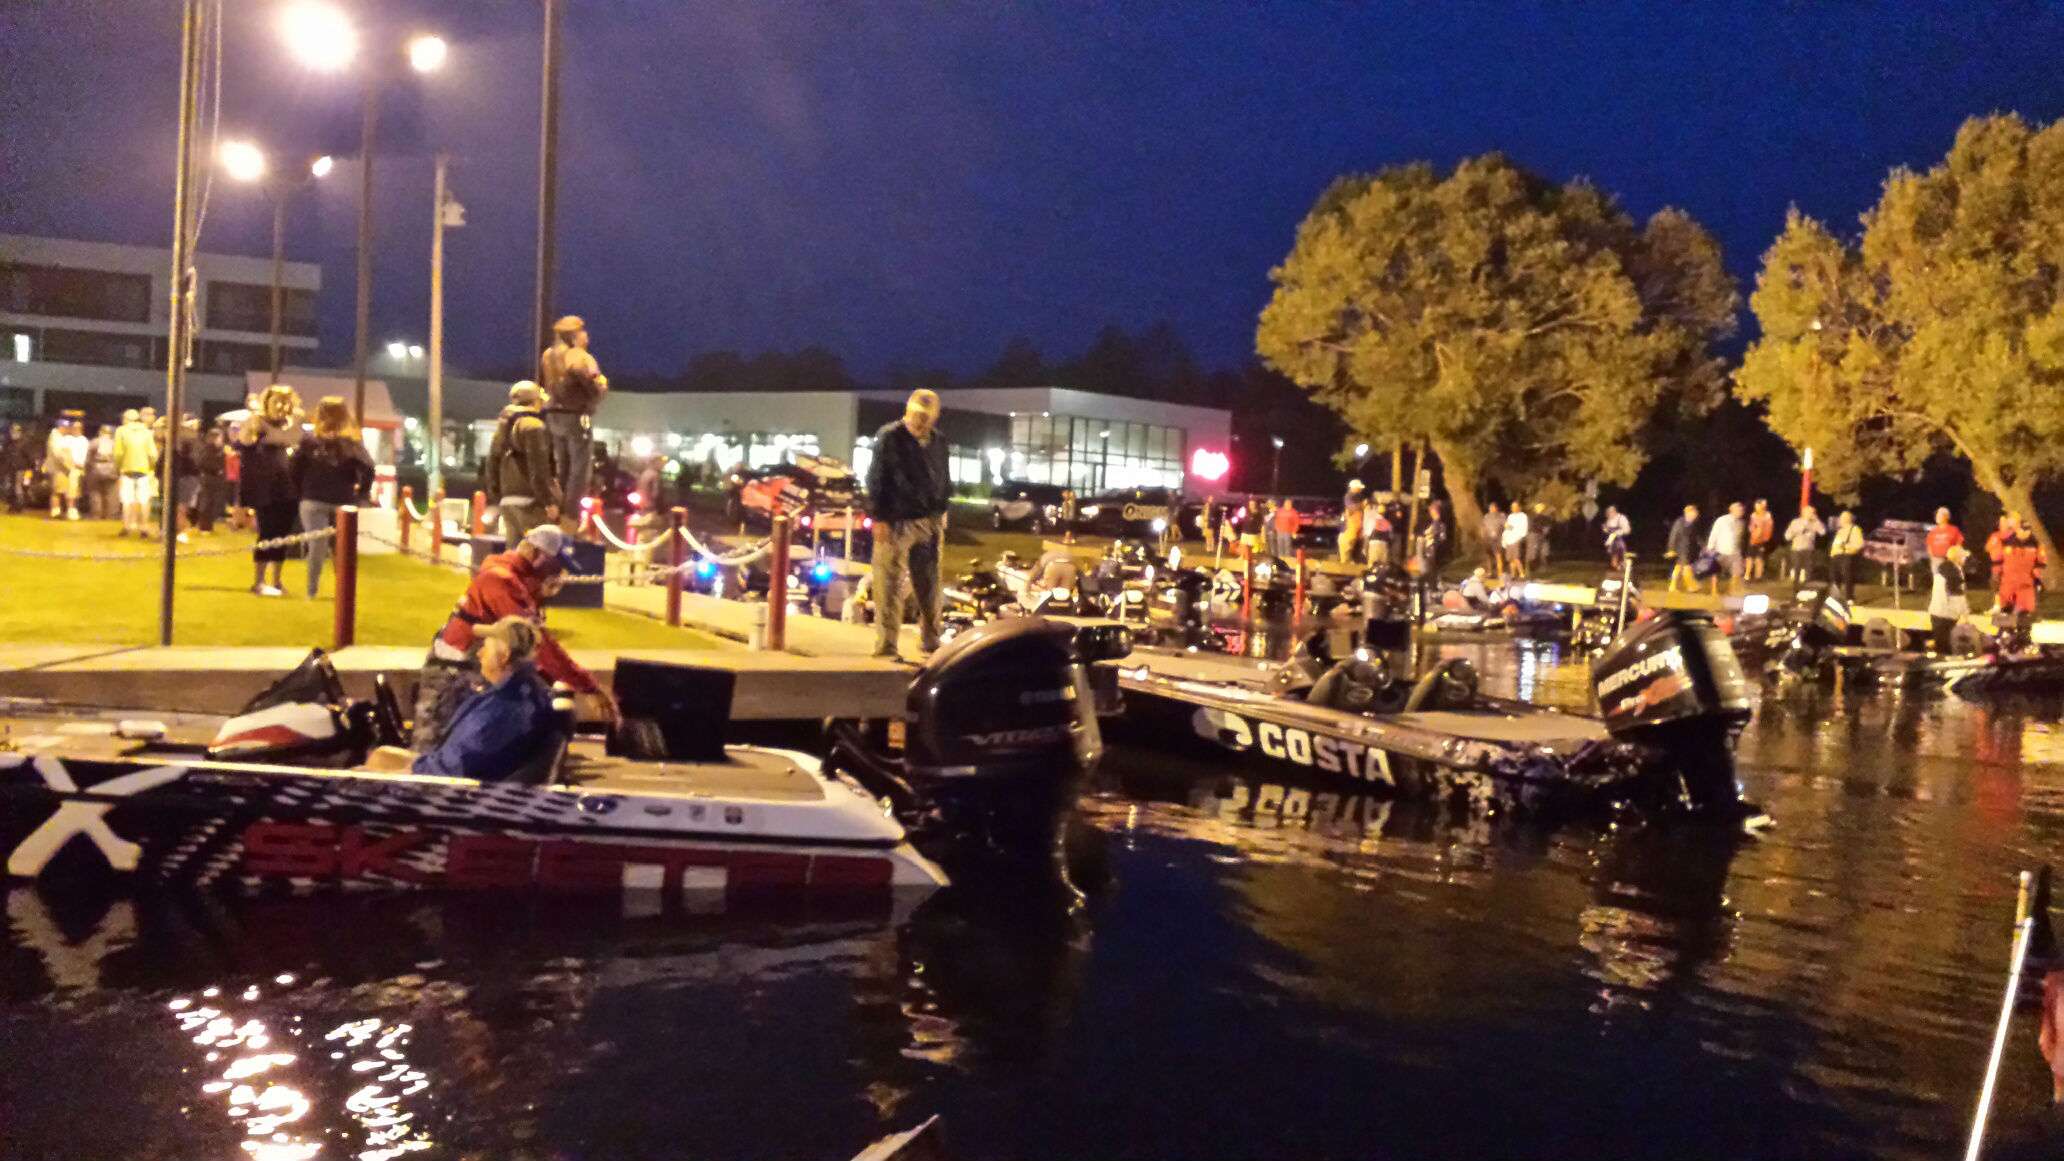 You can feel the anticipation before the start of Day 1 of the 2017 Toyota Bassmaster Angler of the Year Championship. 